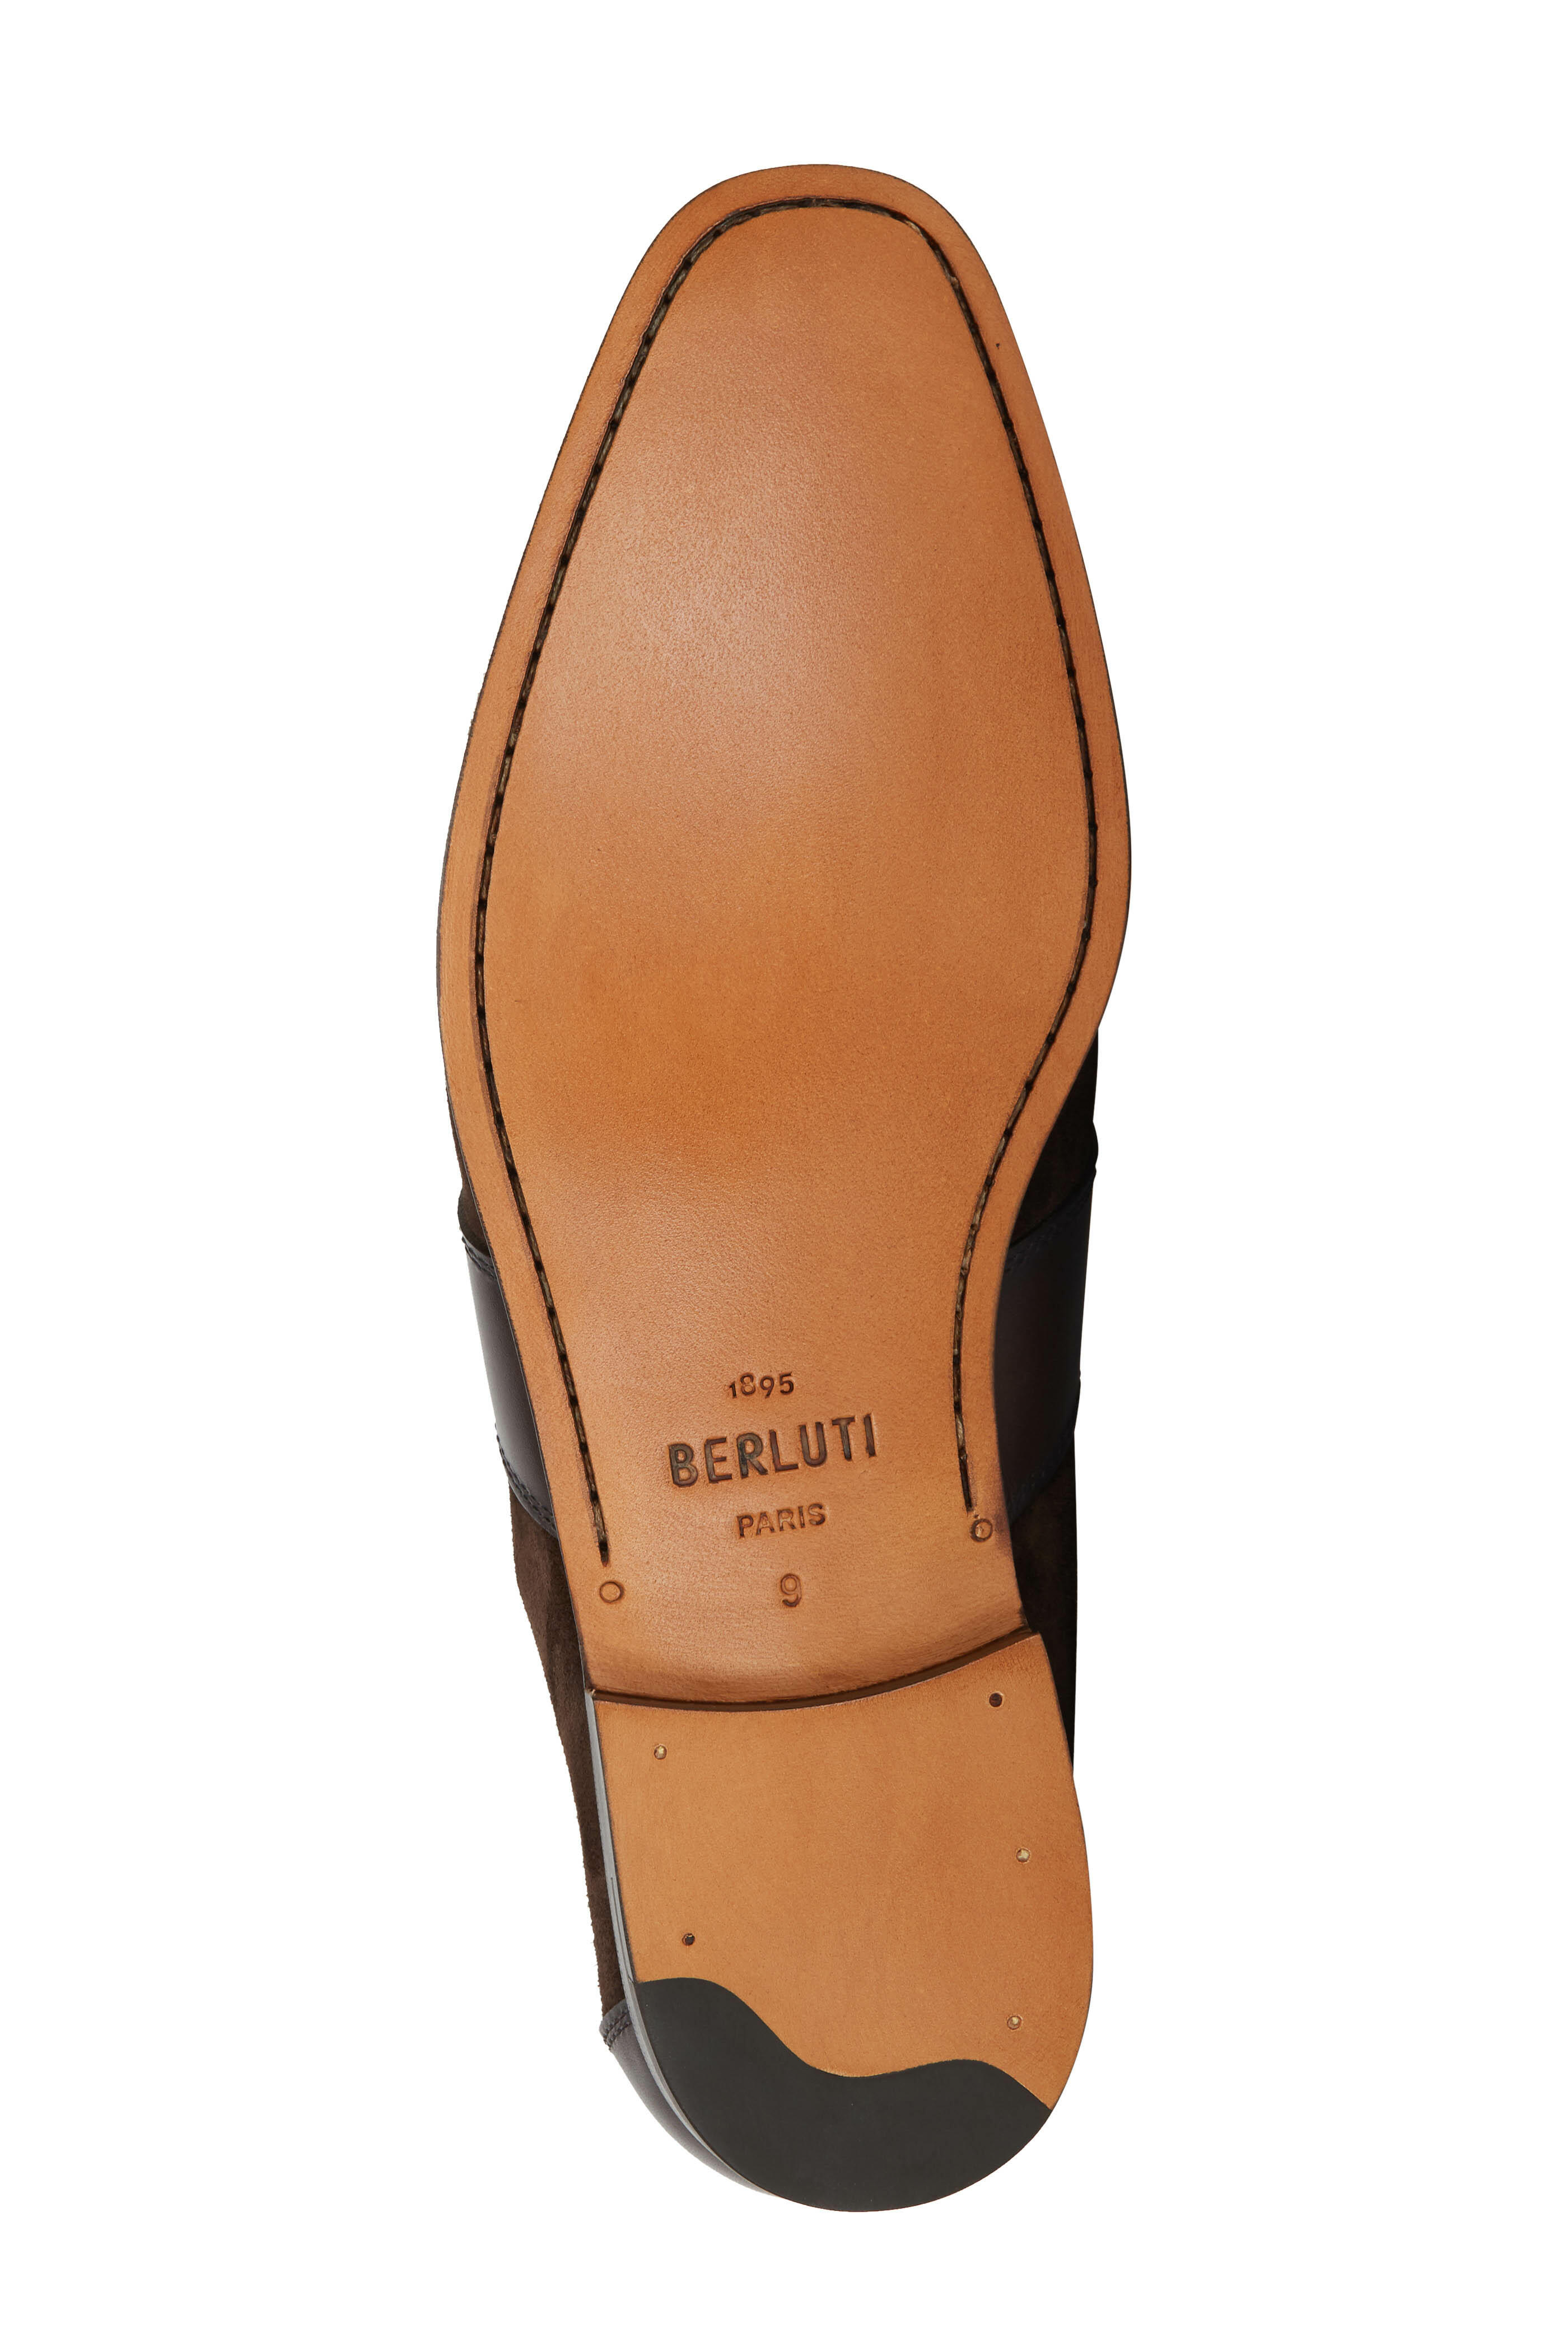 Berluti - Lorenzo TDM Suede Leather Loafer | Mitchell Stores